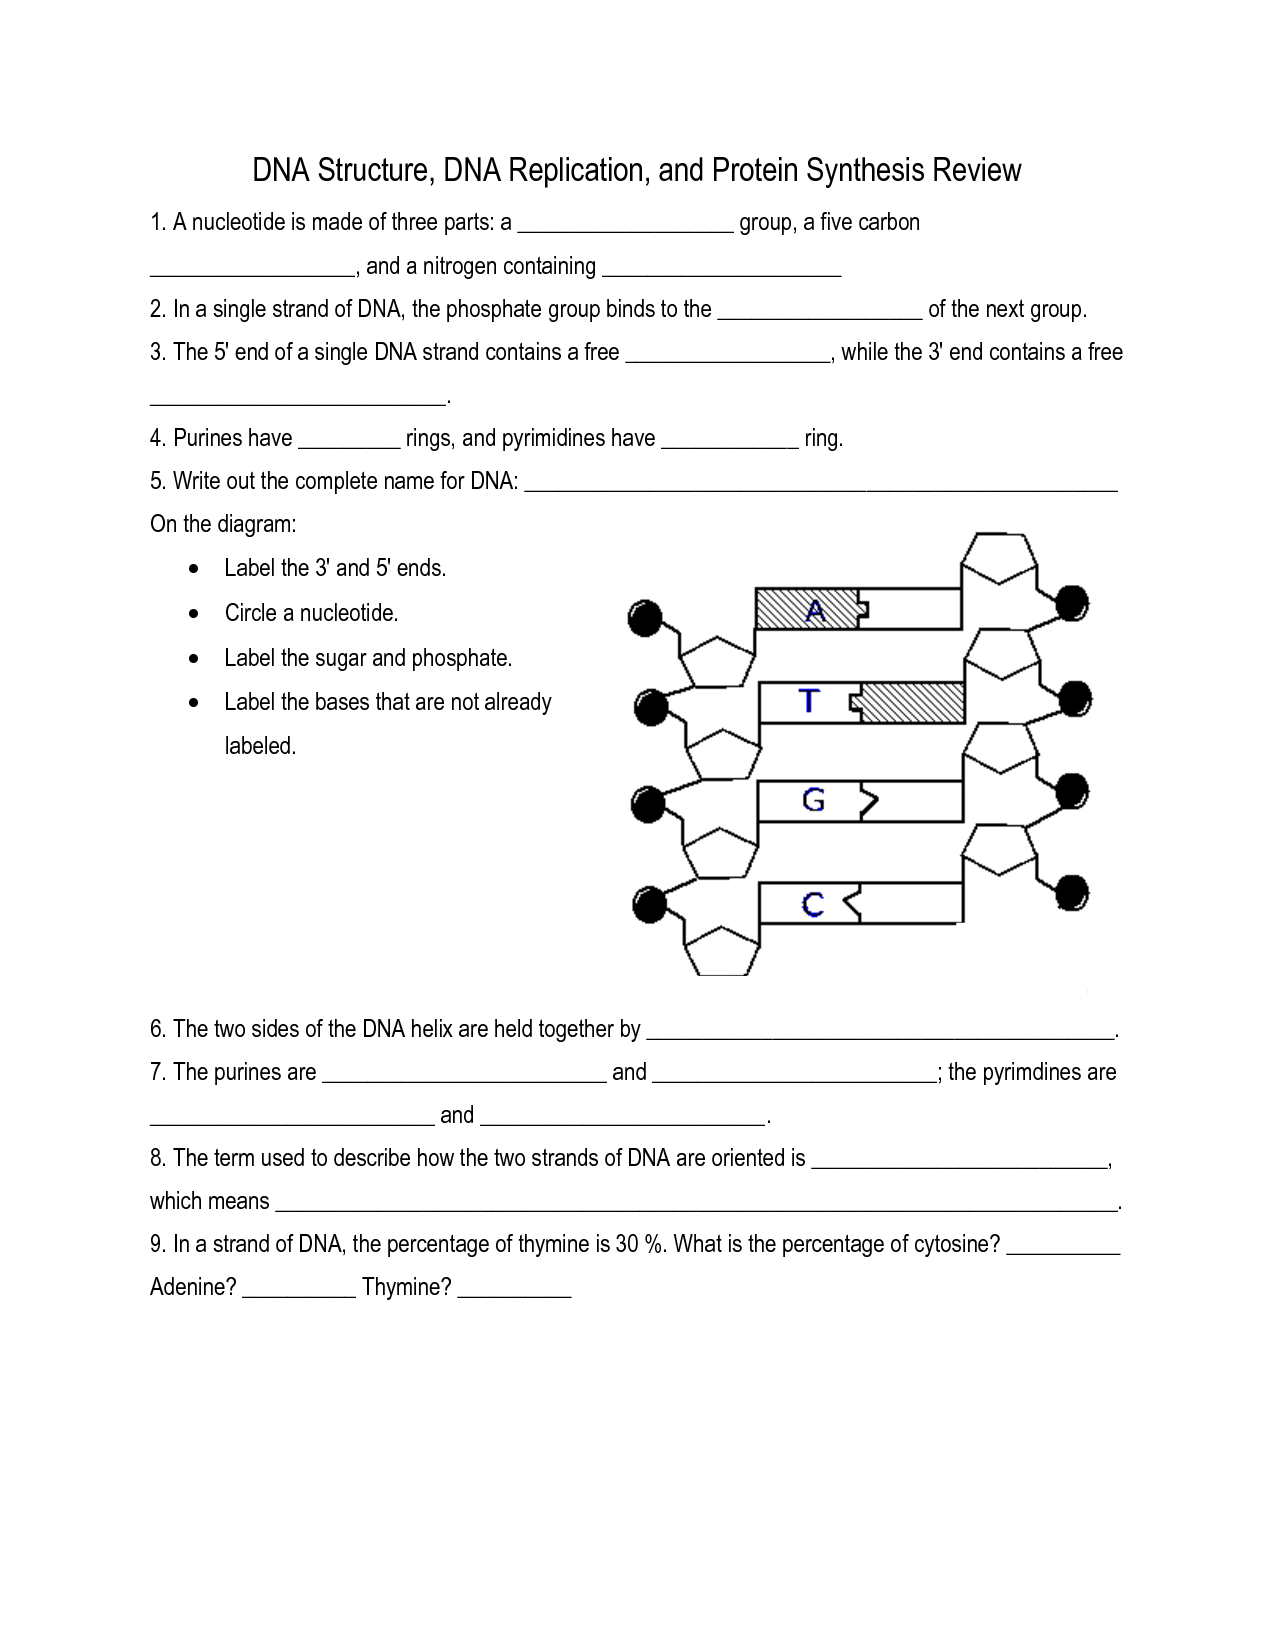 DNA Structure and Replication Worksheet Image